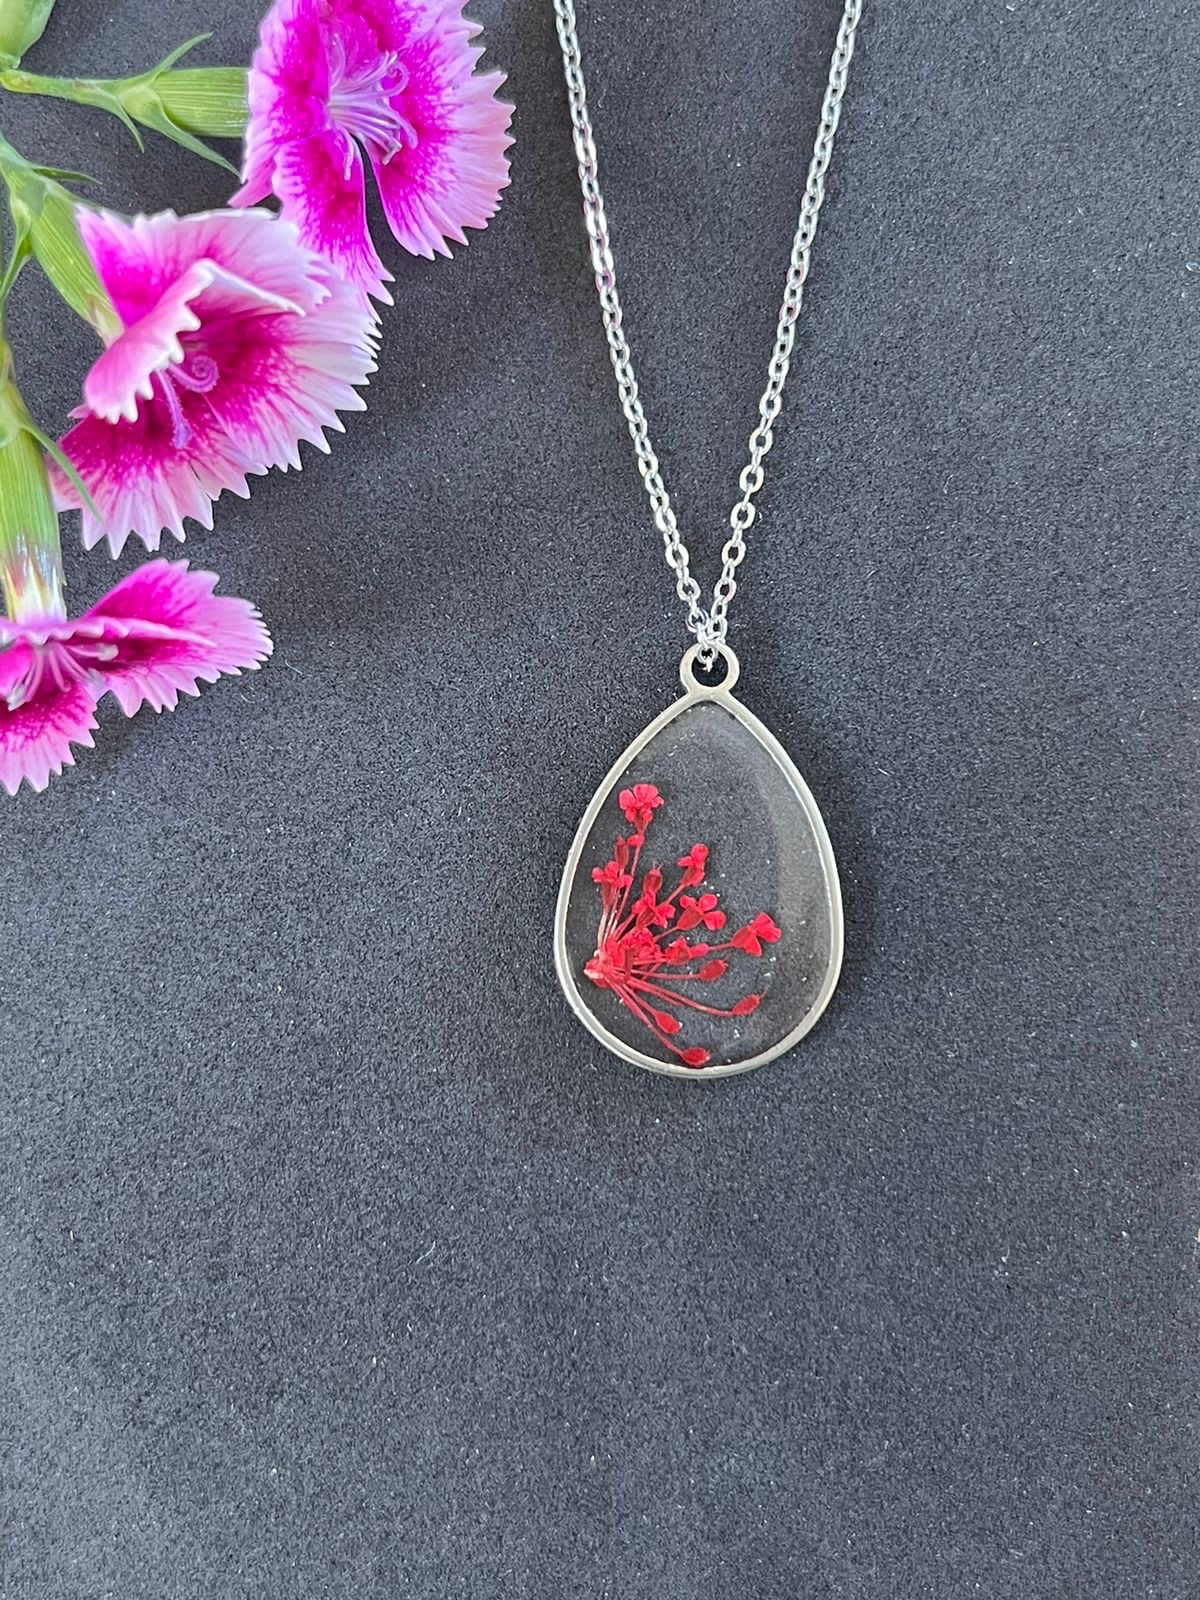 tear drop silver frame with tiny real red flowers necklace gift birthday anniversary